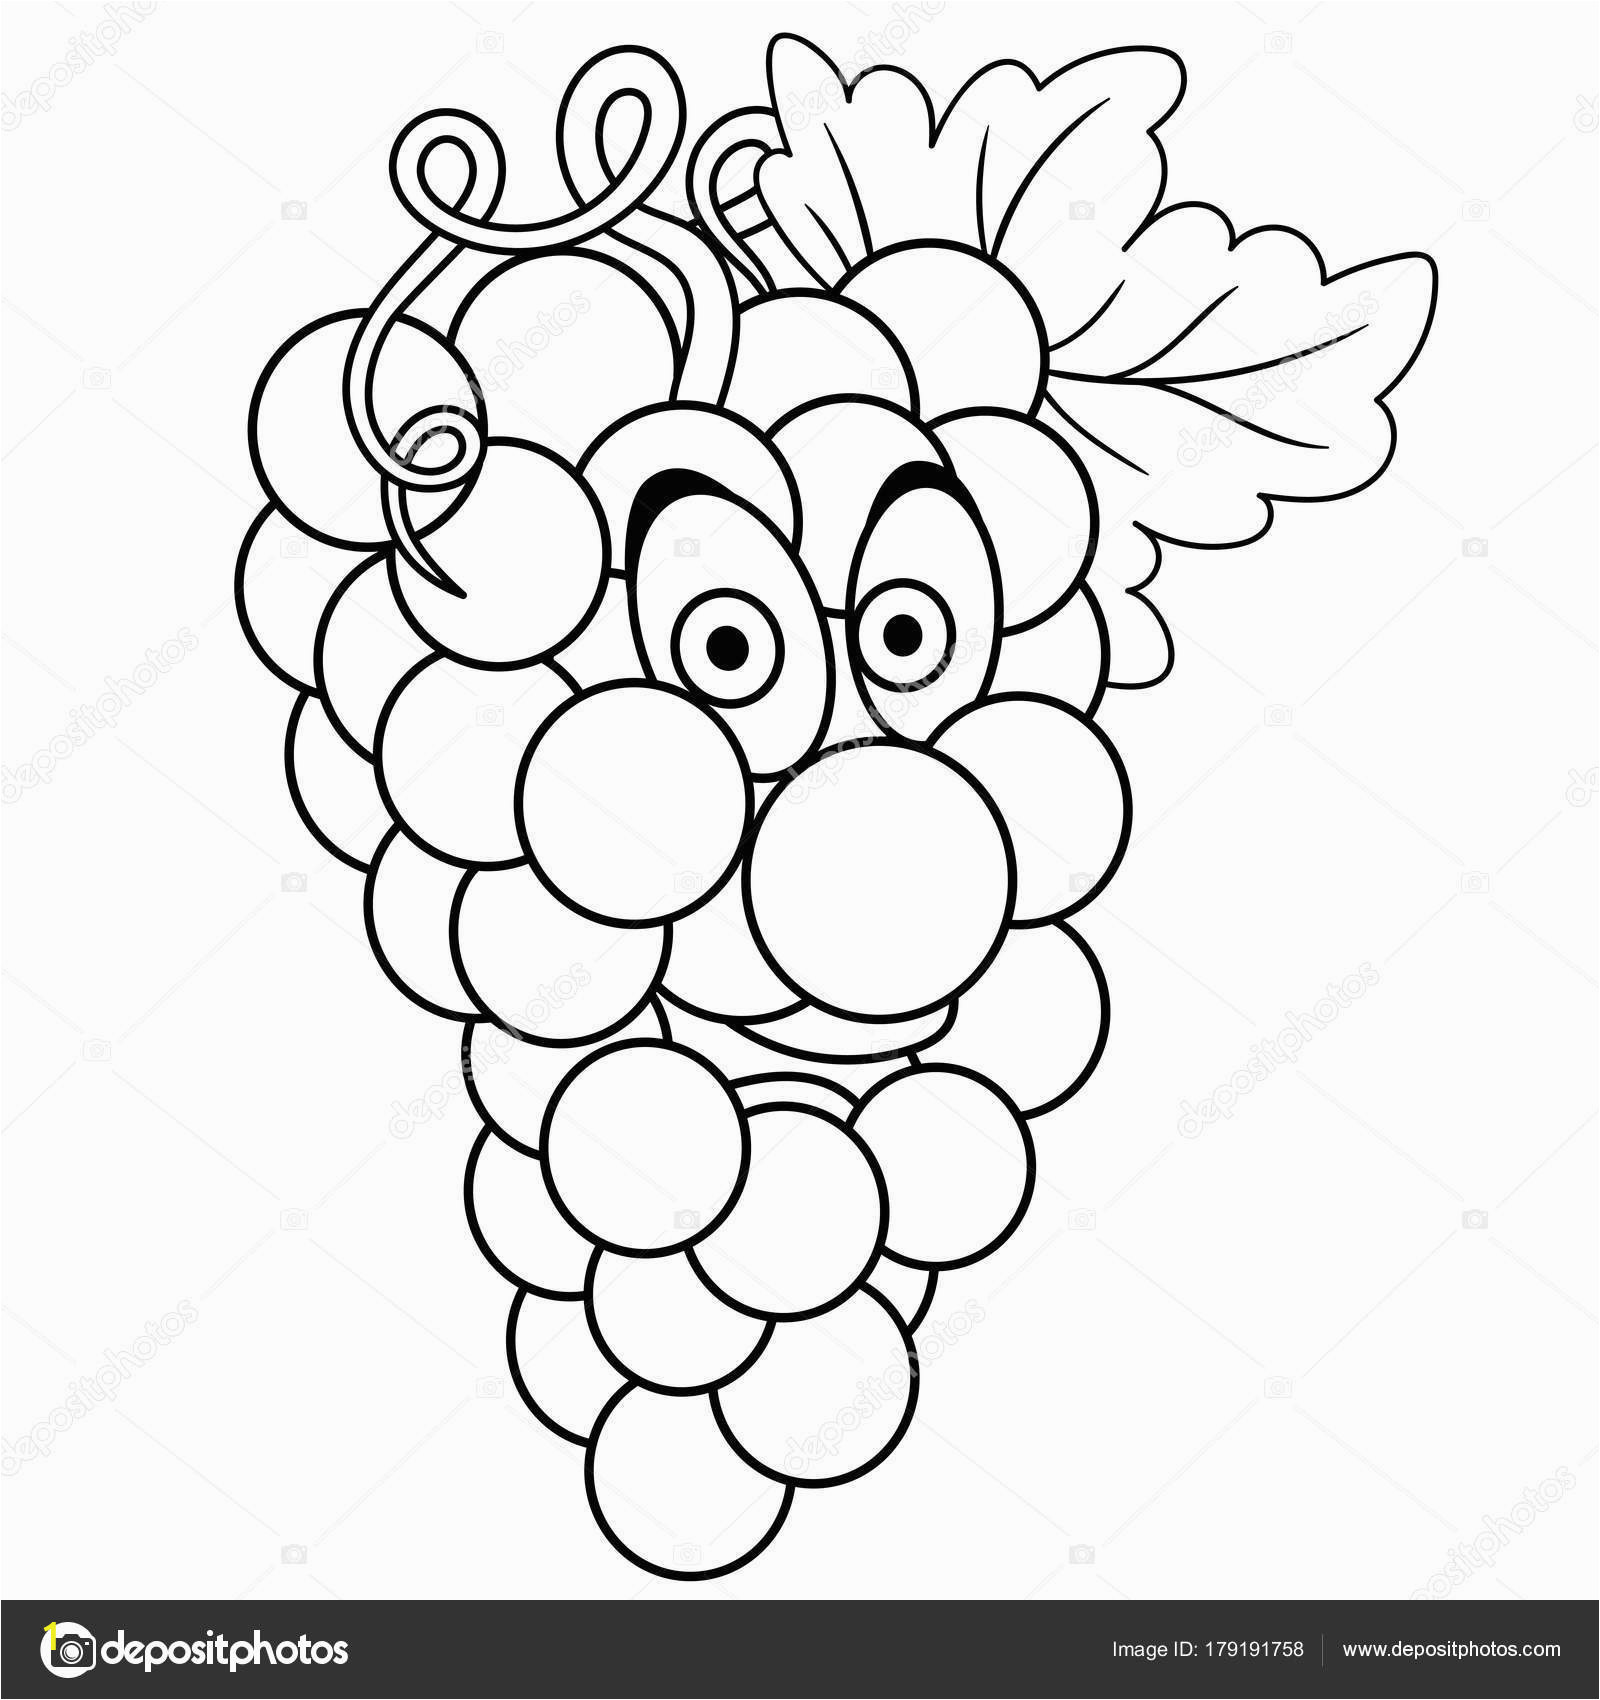 Grape Coloring Pages to Print Coloring Book Coloring Page Cartoon Grapes Character Happy